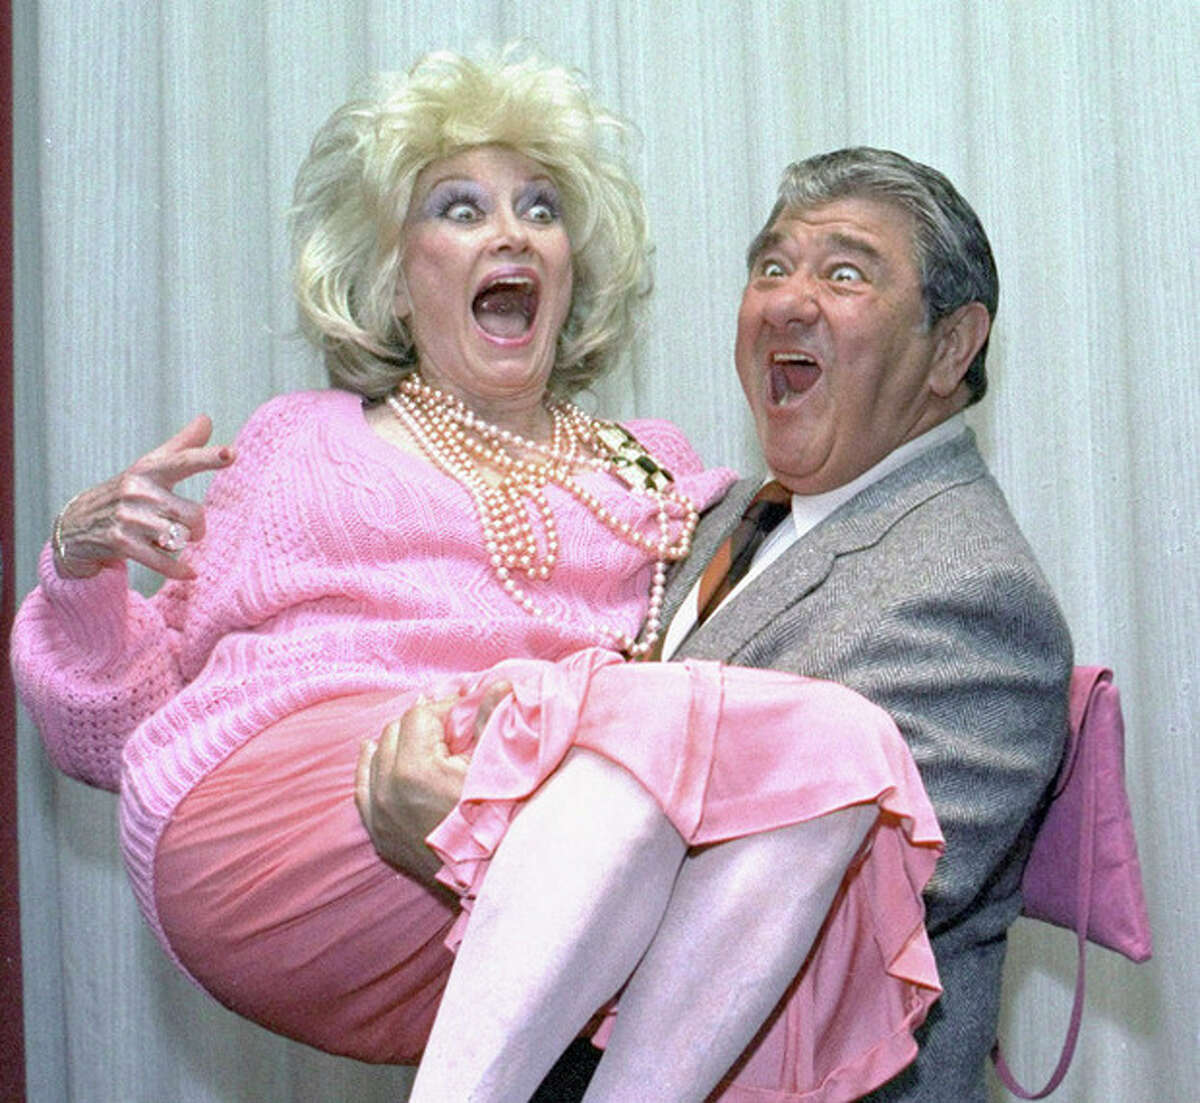 FILE-In this Oct. 9, 1985, file photo, Comedian Phyllis Diller gets a lift from emcee Buddy Hackett prior to the celebrity stag luncheon roast at the New York Friars Club in New York City. Diller, the housewife turned humorist who aimed some of her sharpest barbs at herself, died Monday, Aug. 20, 2012, at age 95 in Los Angeles.(AP Photo/Marty Lederhandler, File)